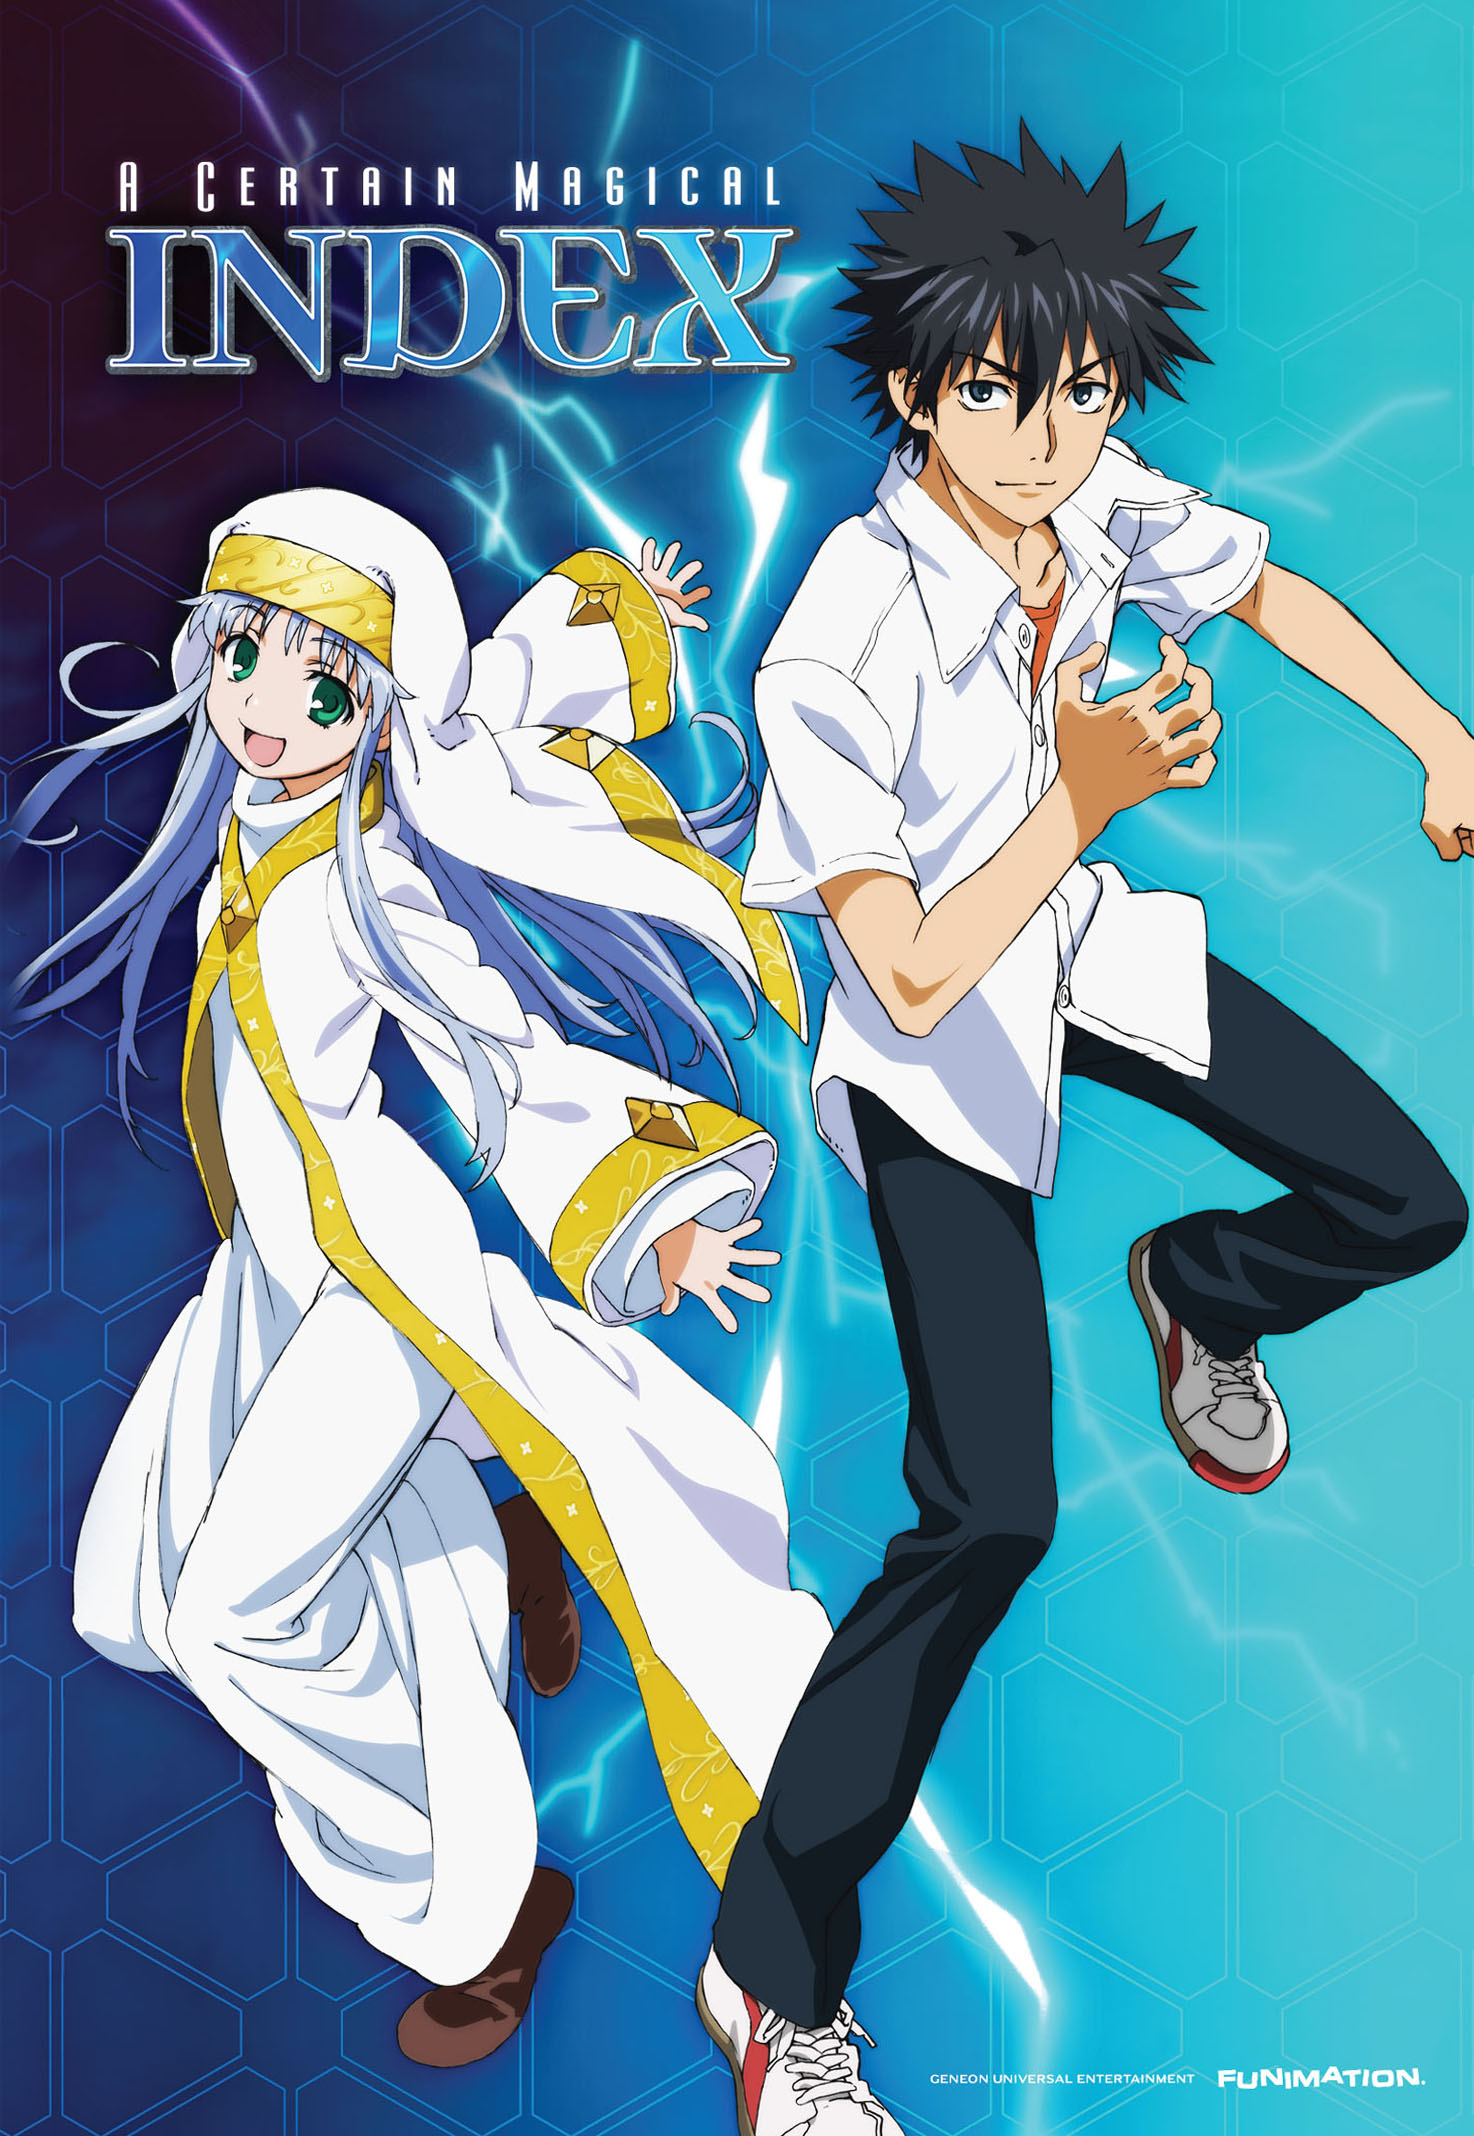 A Certain Magical Index: Part One [2 Discs] [DVD] - Best Buy